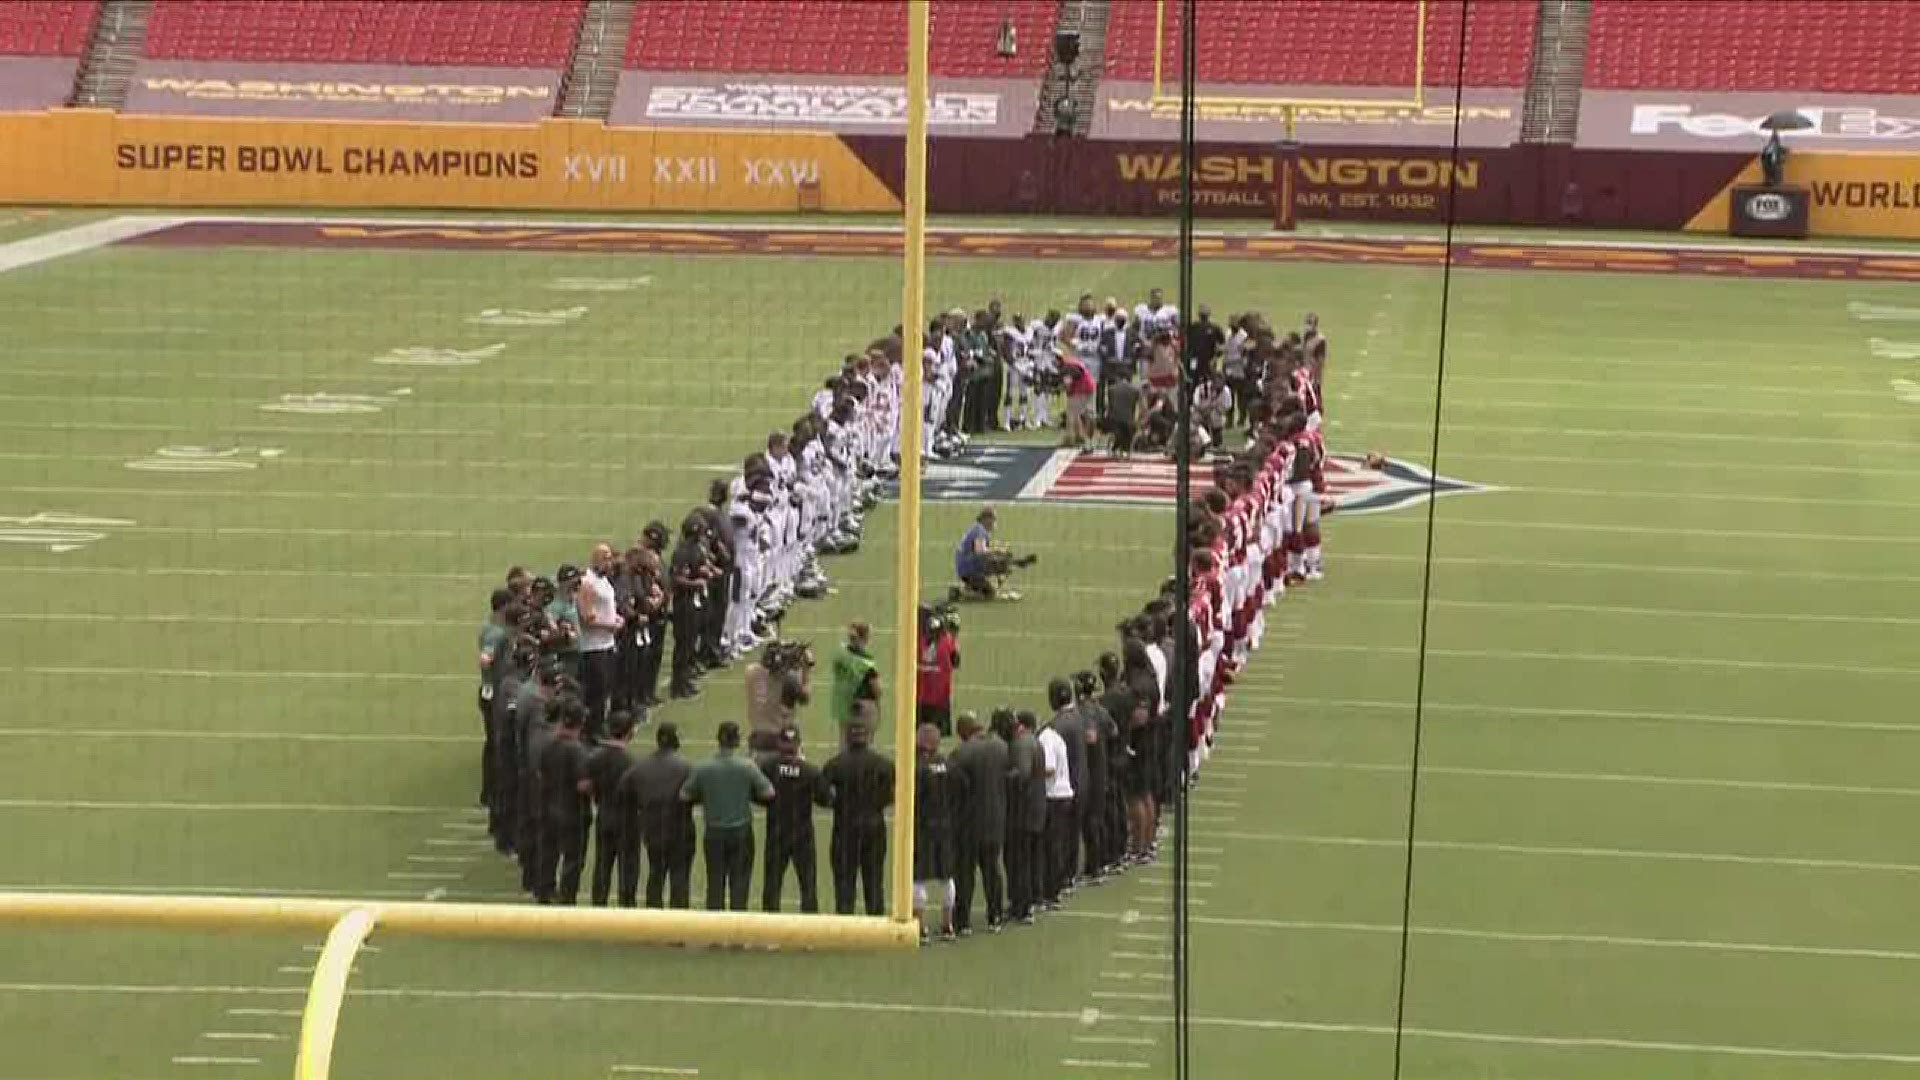 The players formed a circle to the sound of the Black National Anthem “Lift Every Voice and Sing.”